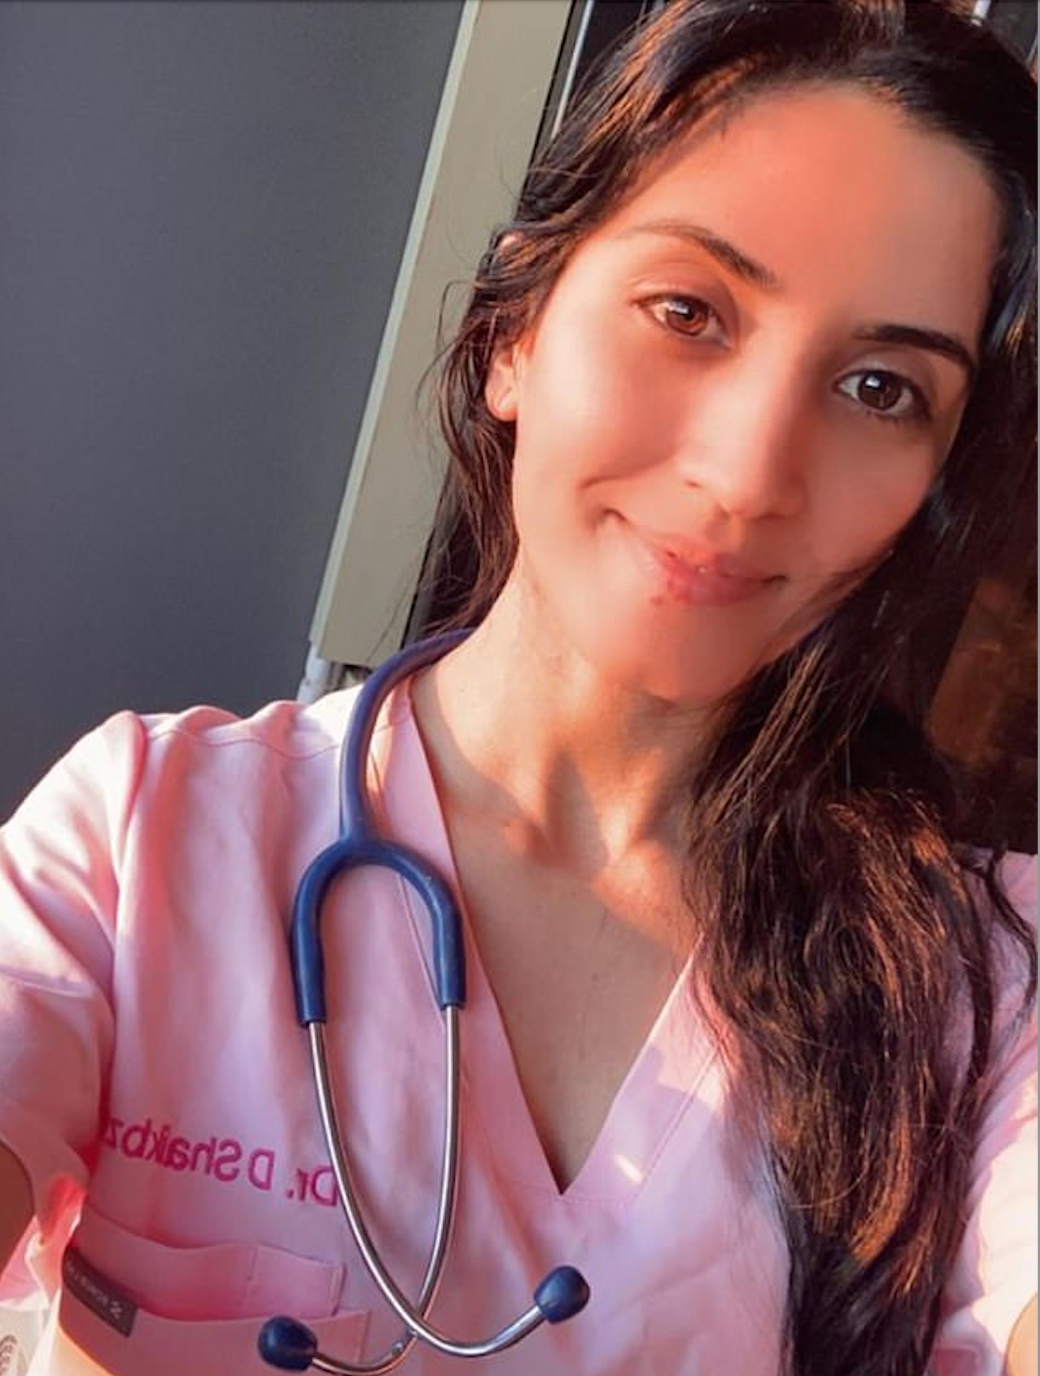 ‘Dr’ Karezi poses in pink scrubs and a stethoscope on Instagram